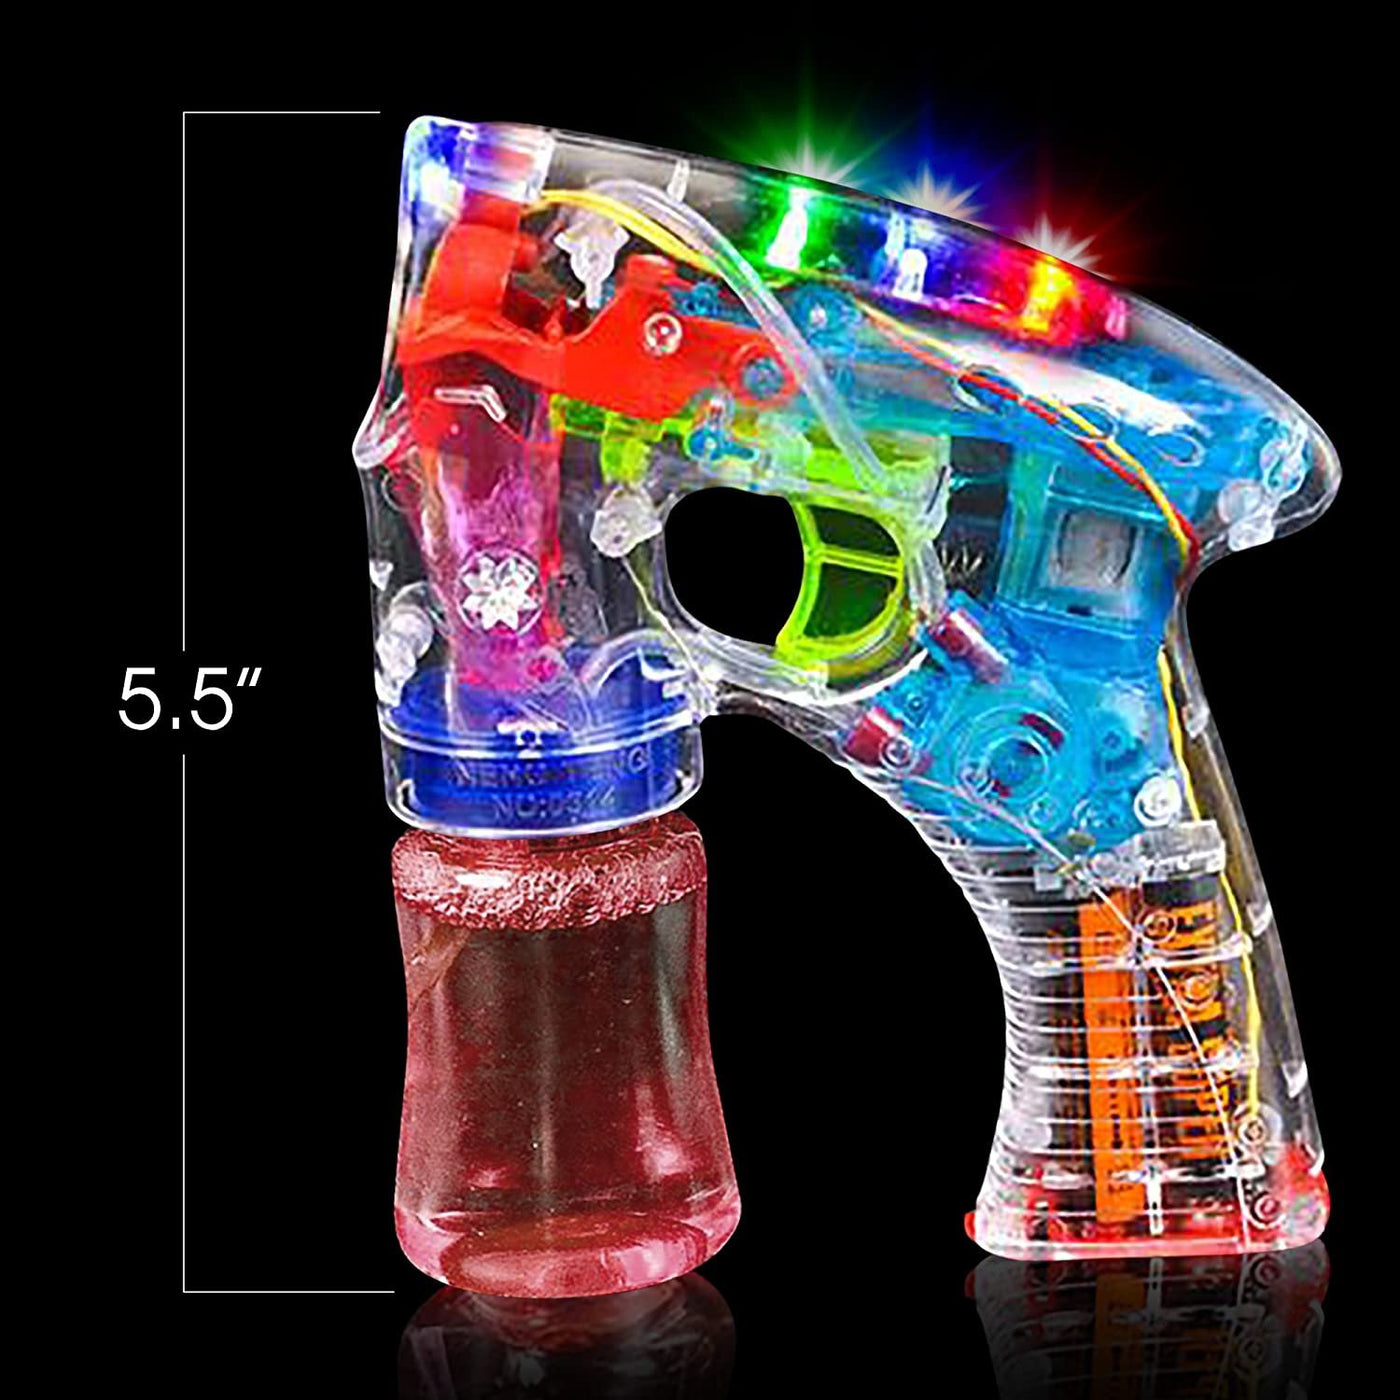 Light Up Bubble Gun - Set of 3 - Medium Lightweight Design - Perfect for Summertime - Fun, Engaging and Entertaining - Party Favor, Amazing Gift Idea Boys Girls - Batteries Included